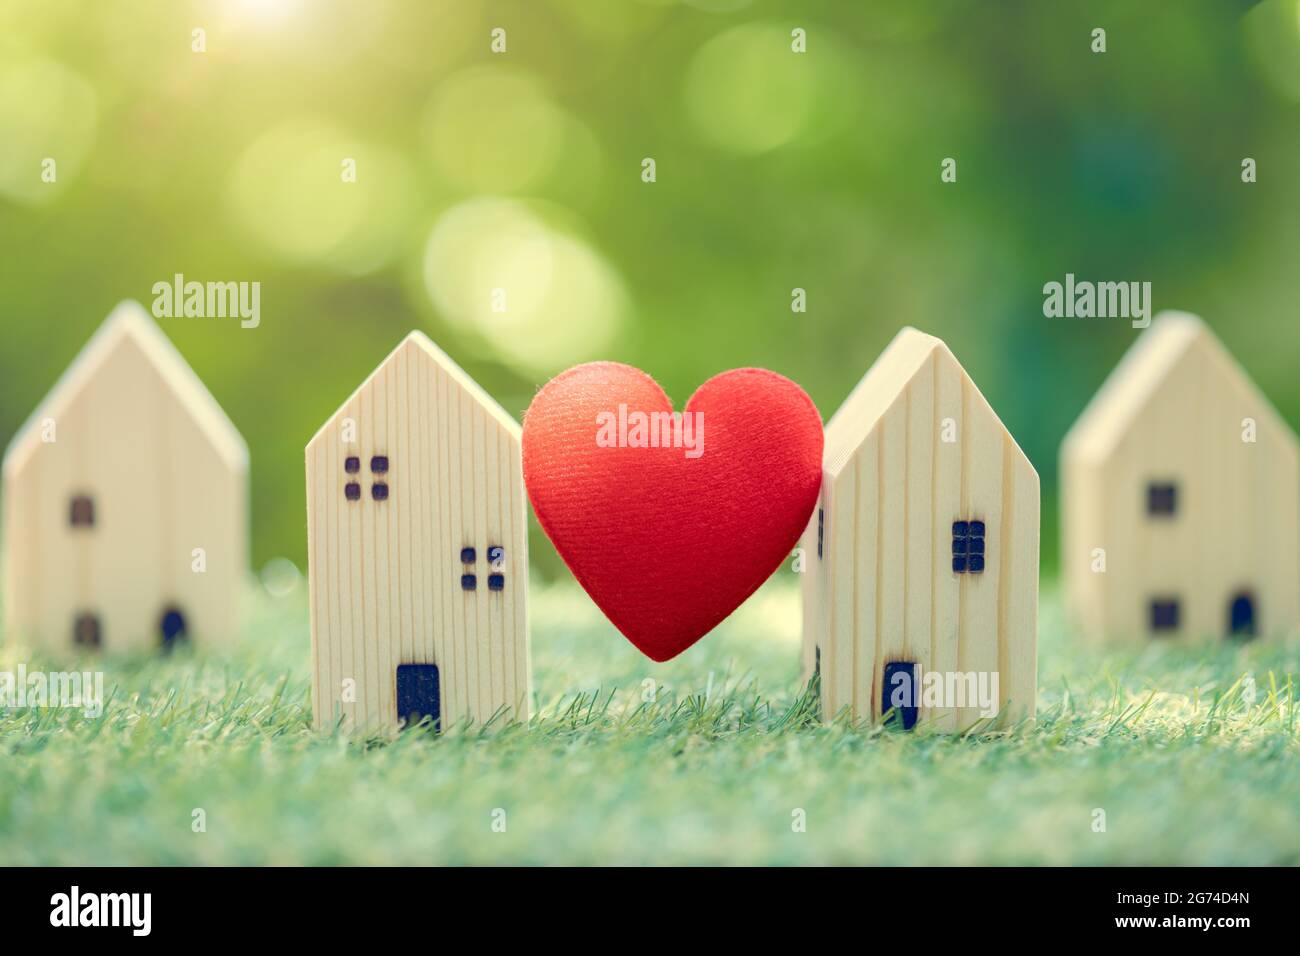 Love heart between two house wood model for stay at home for healthy community together on green fresh ecology natural environment. Stock Photo